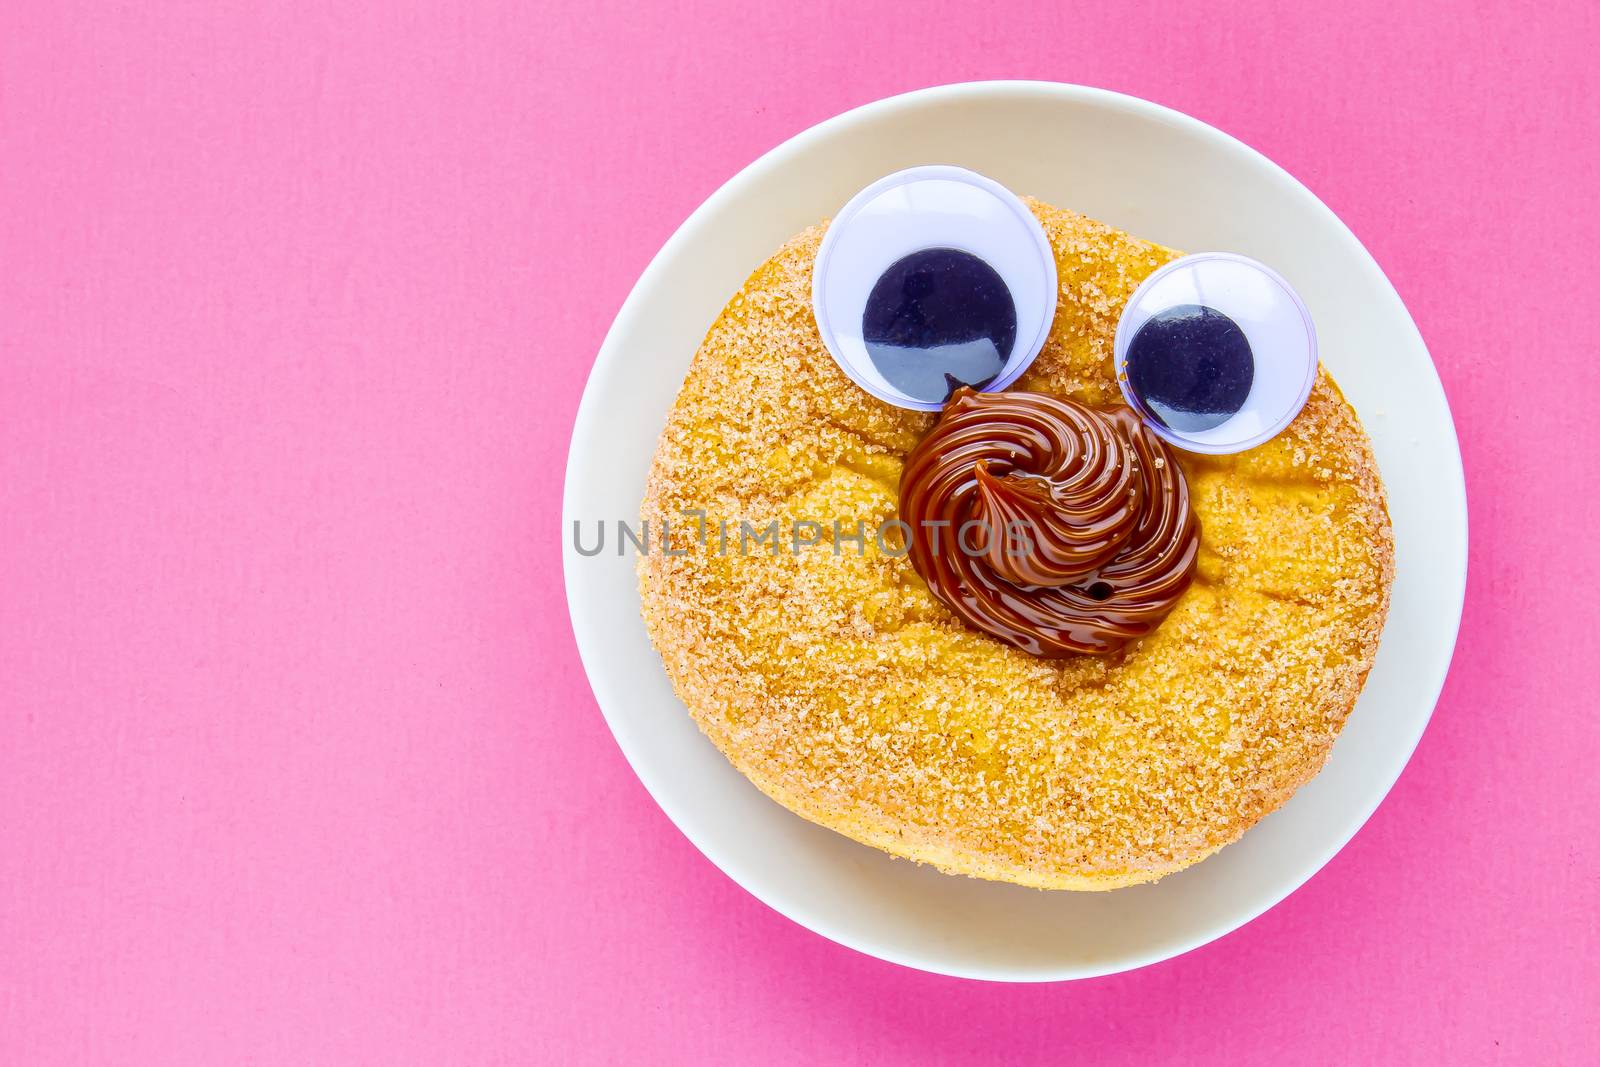 A Tim Hortons Dulce de Leche Donut with Black Wiggle Googly Eyeballs on a plate with pink background by oasisamuel